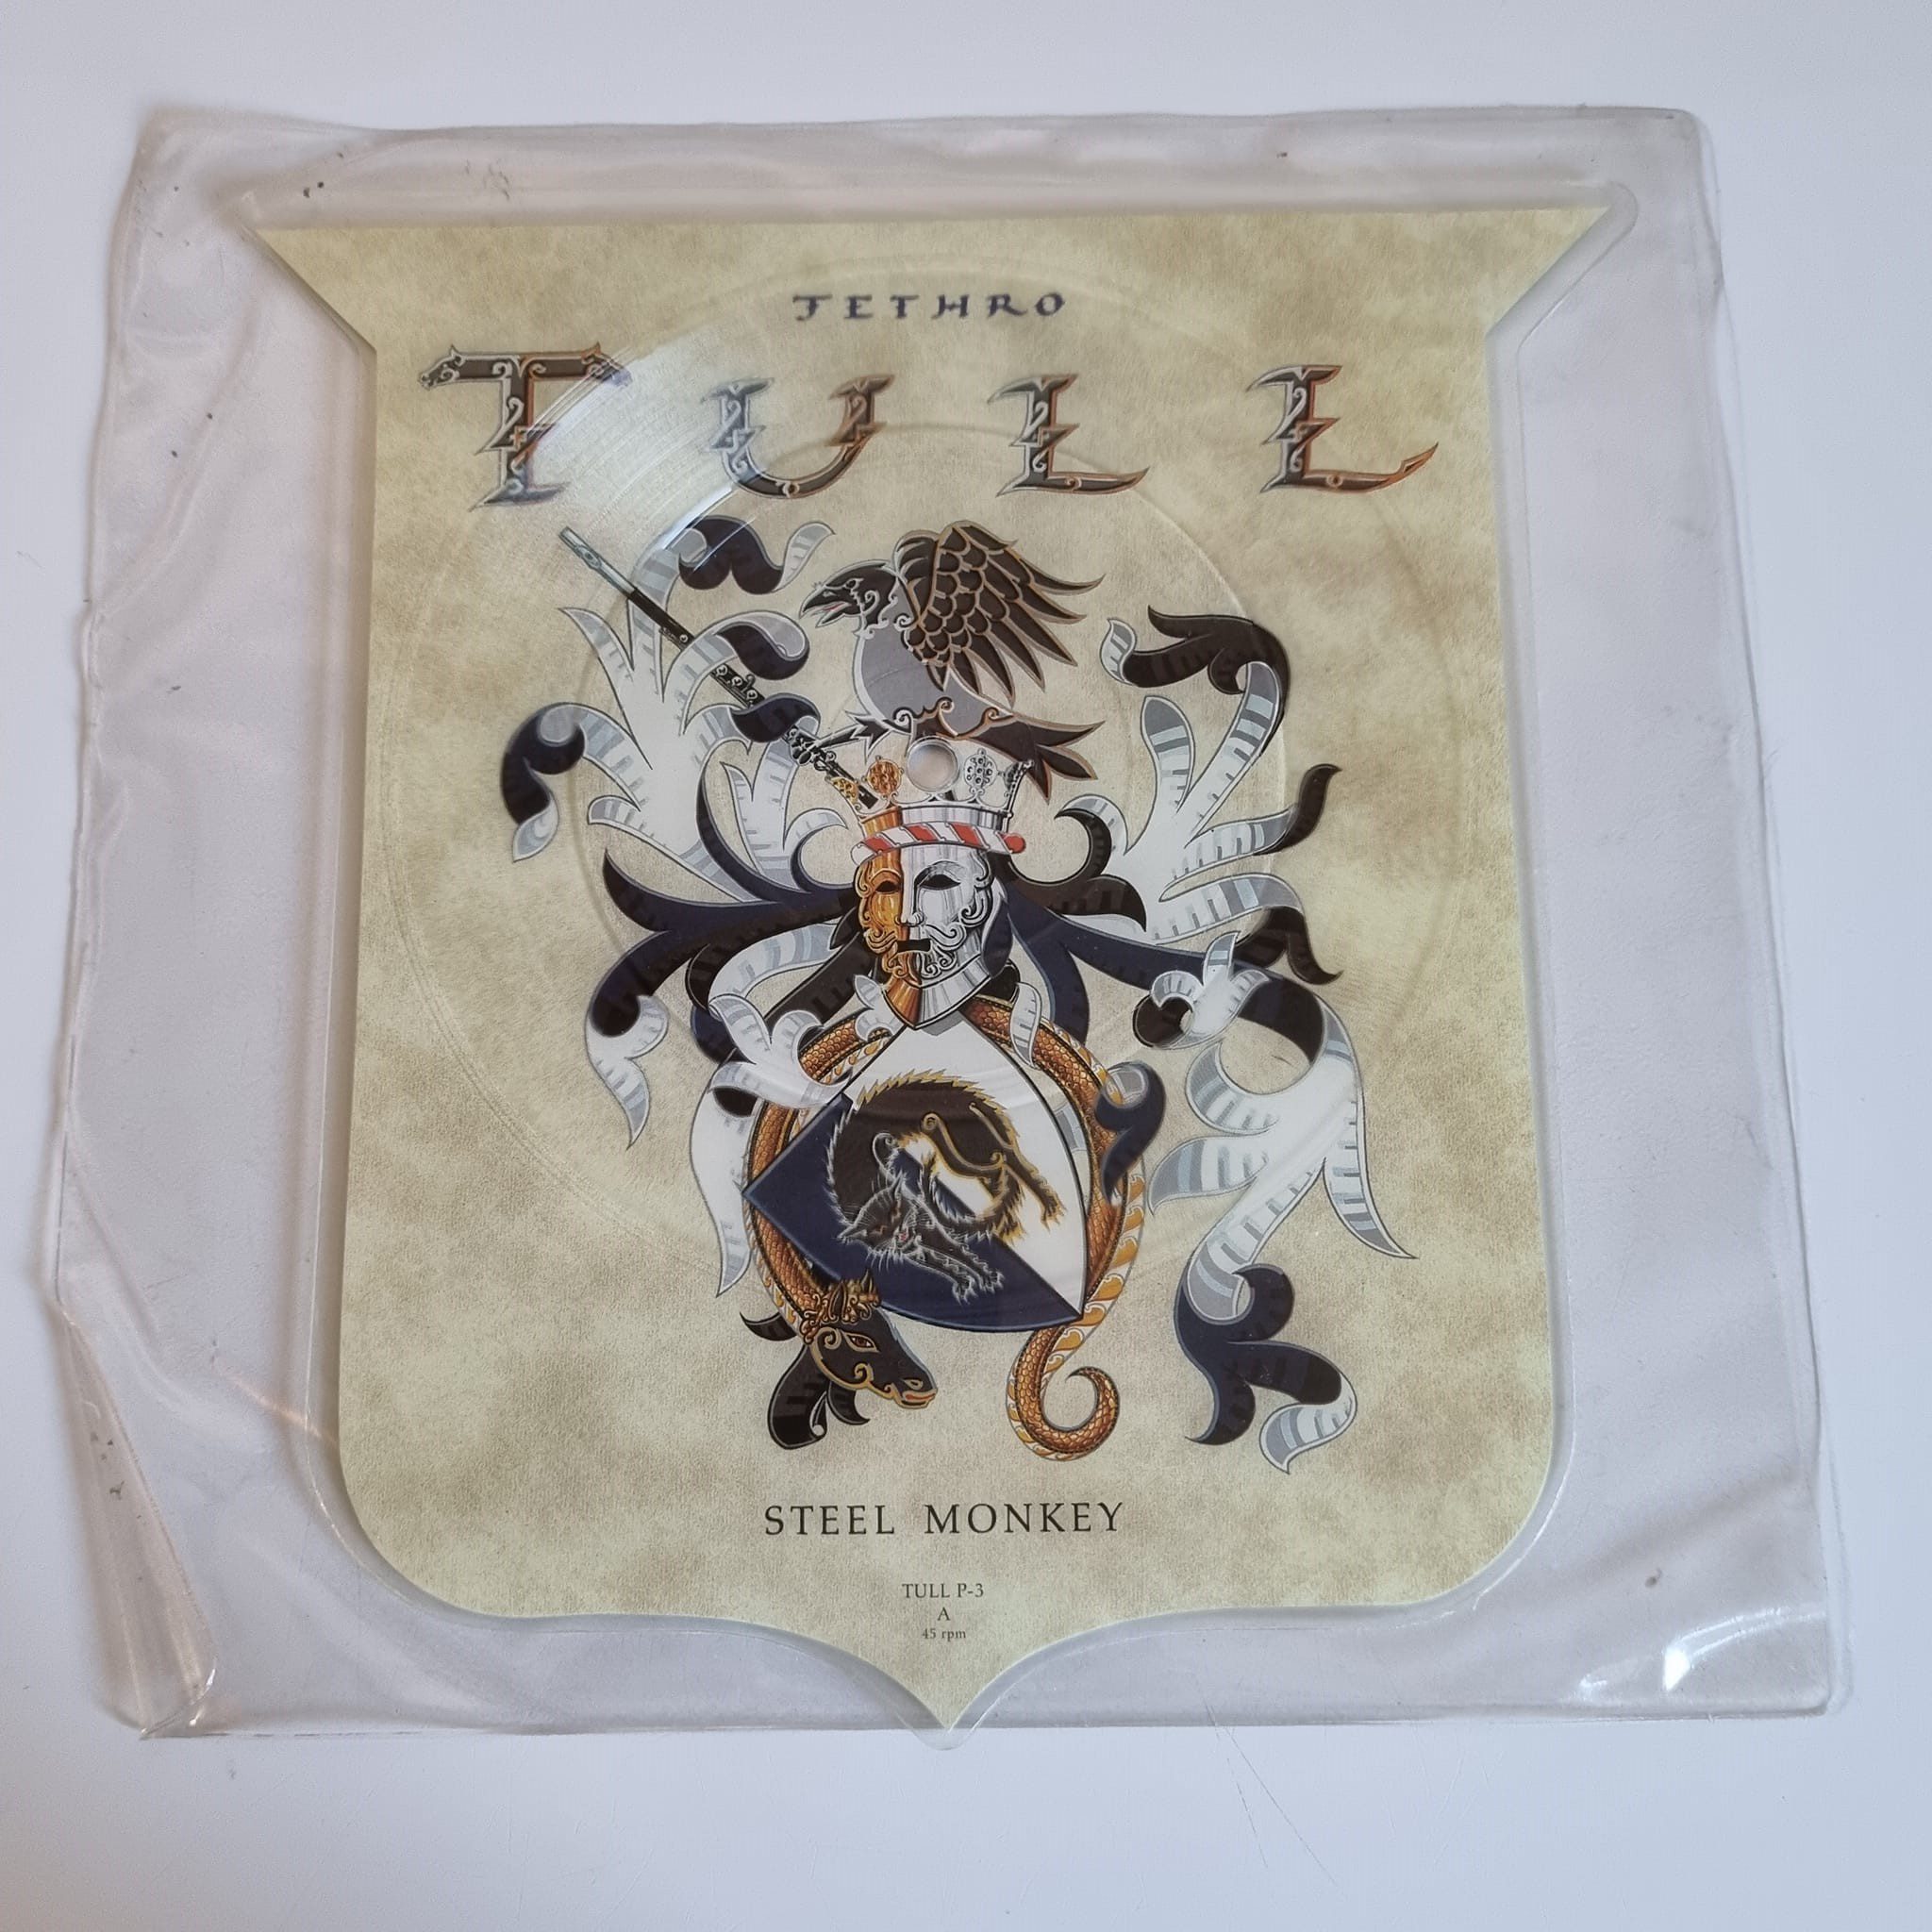 Buy this rare Jethro Tull record by clicking here